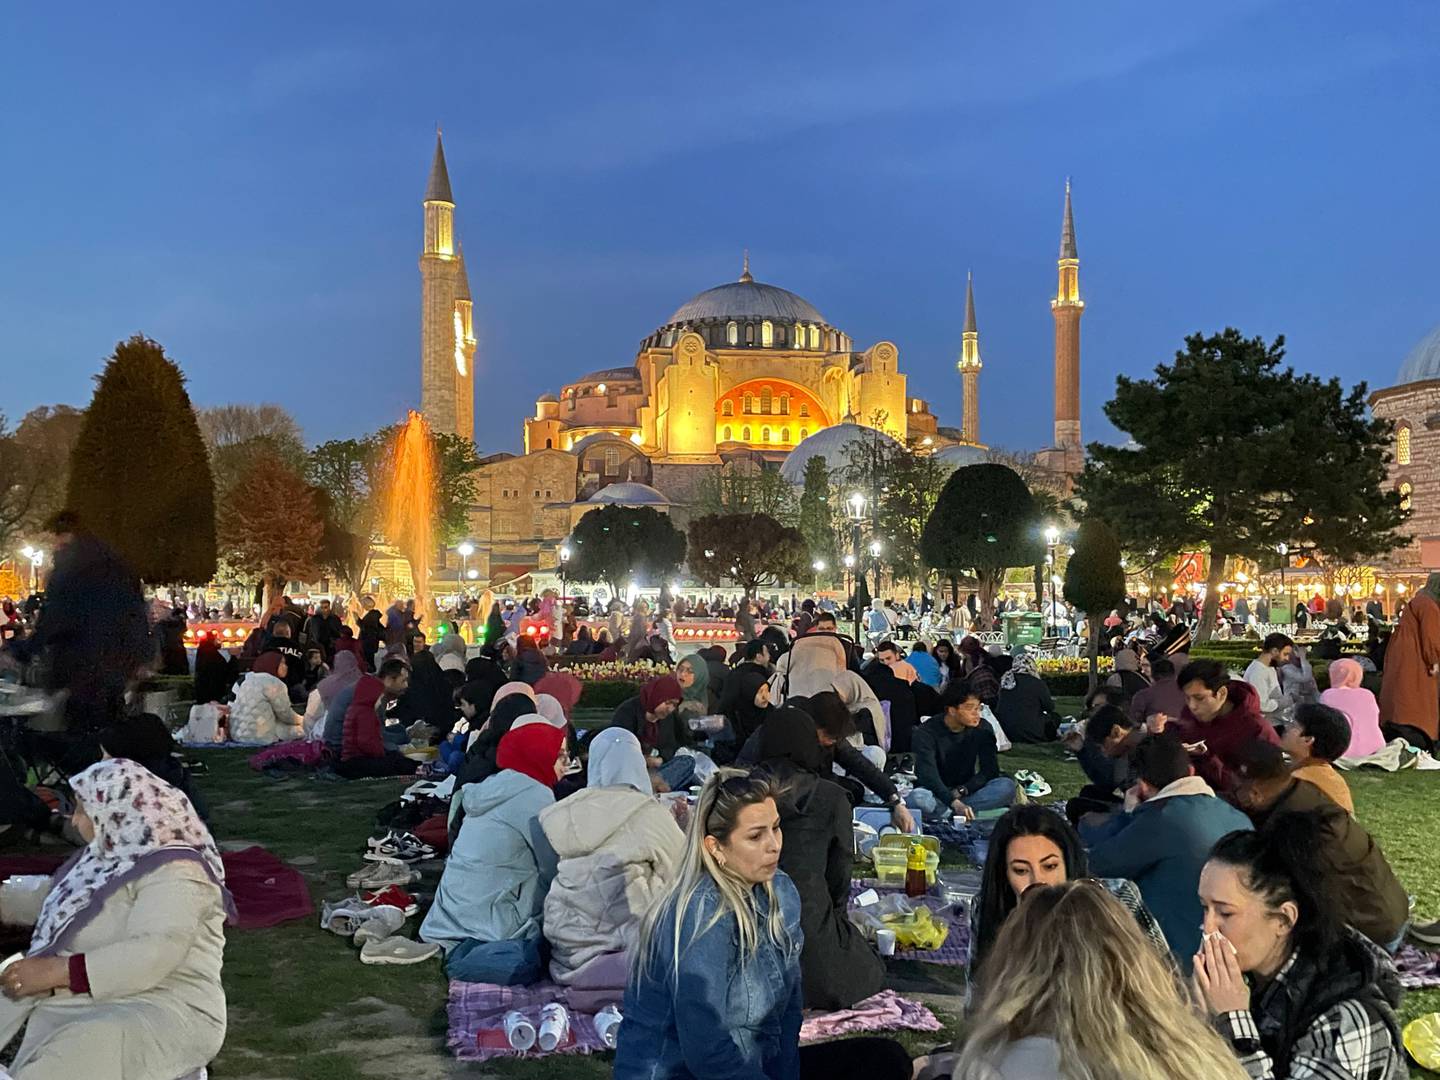 The scene from the “Blue Mosque at night” tour in Istanbul during Ramadan